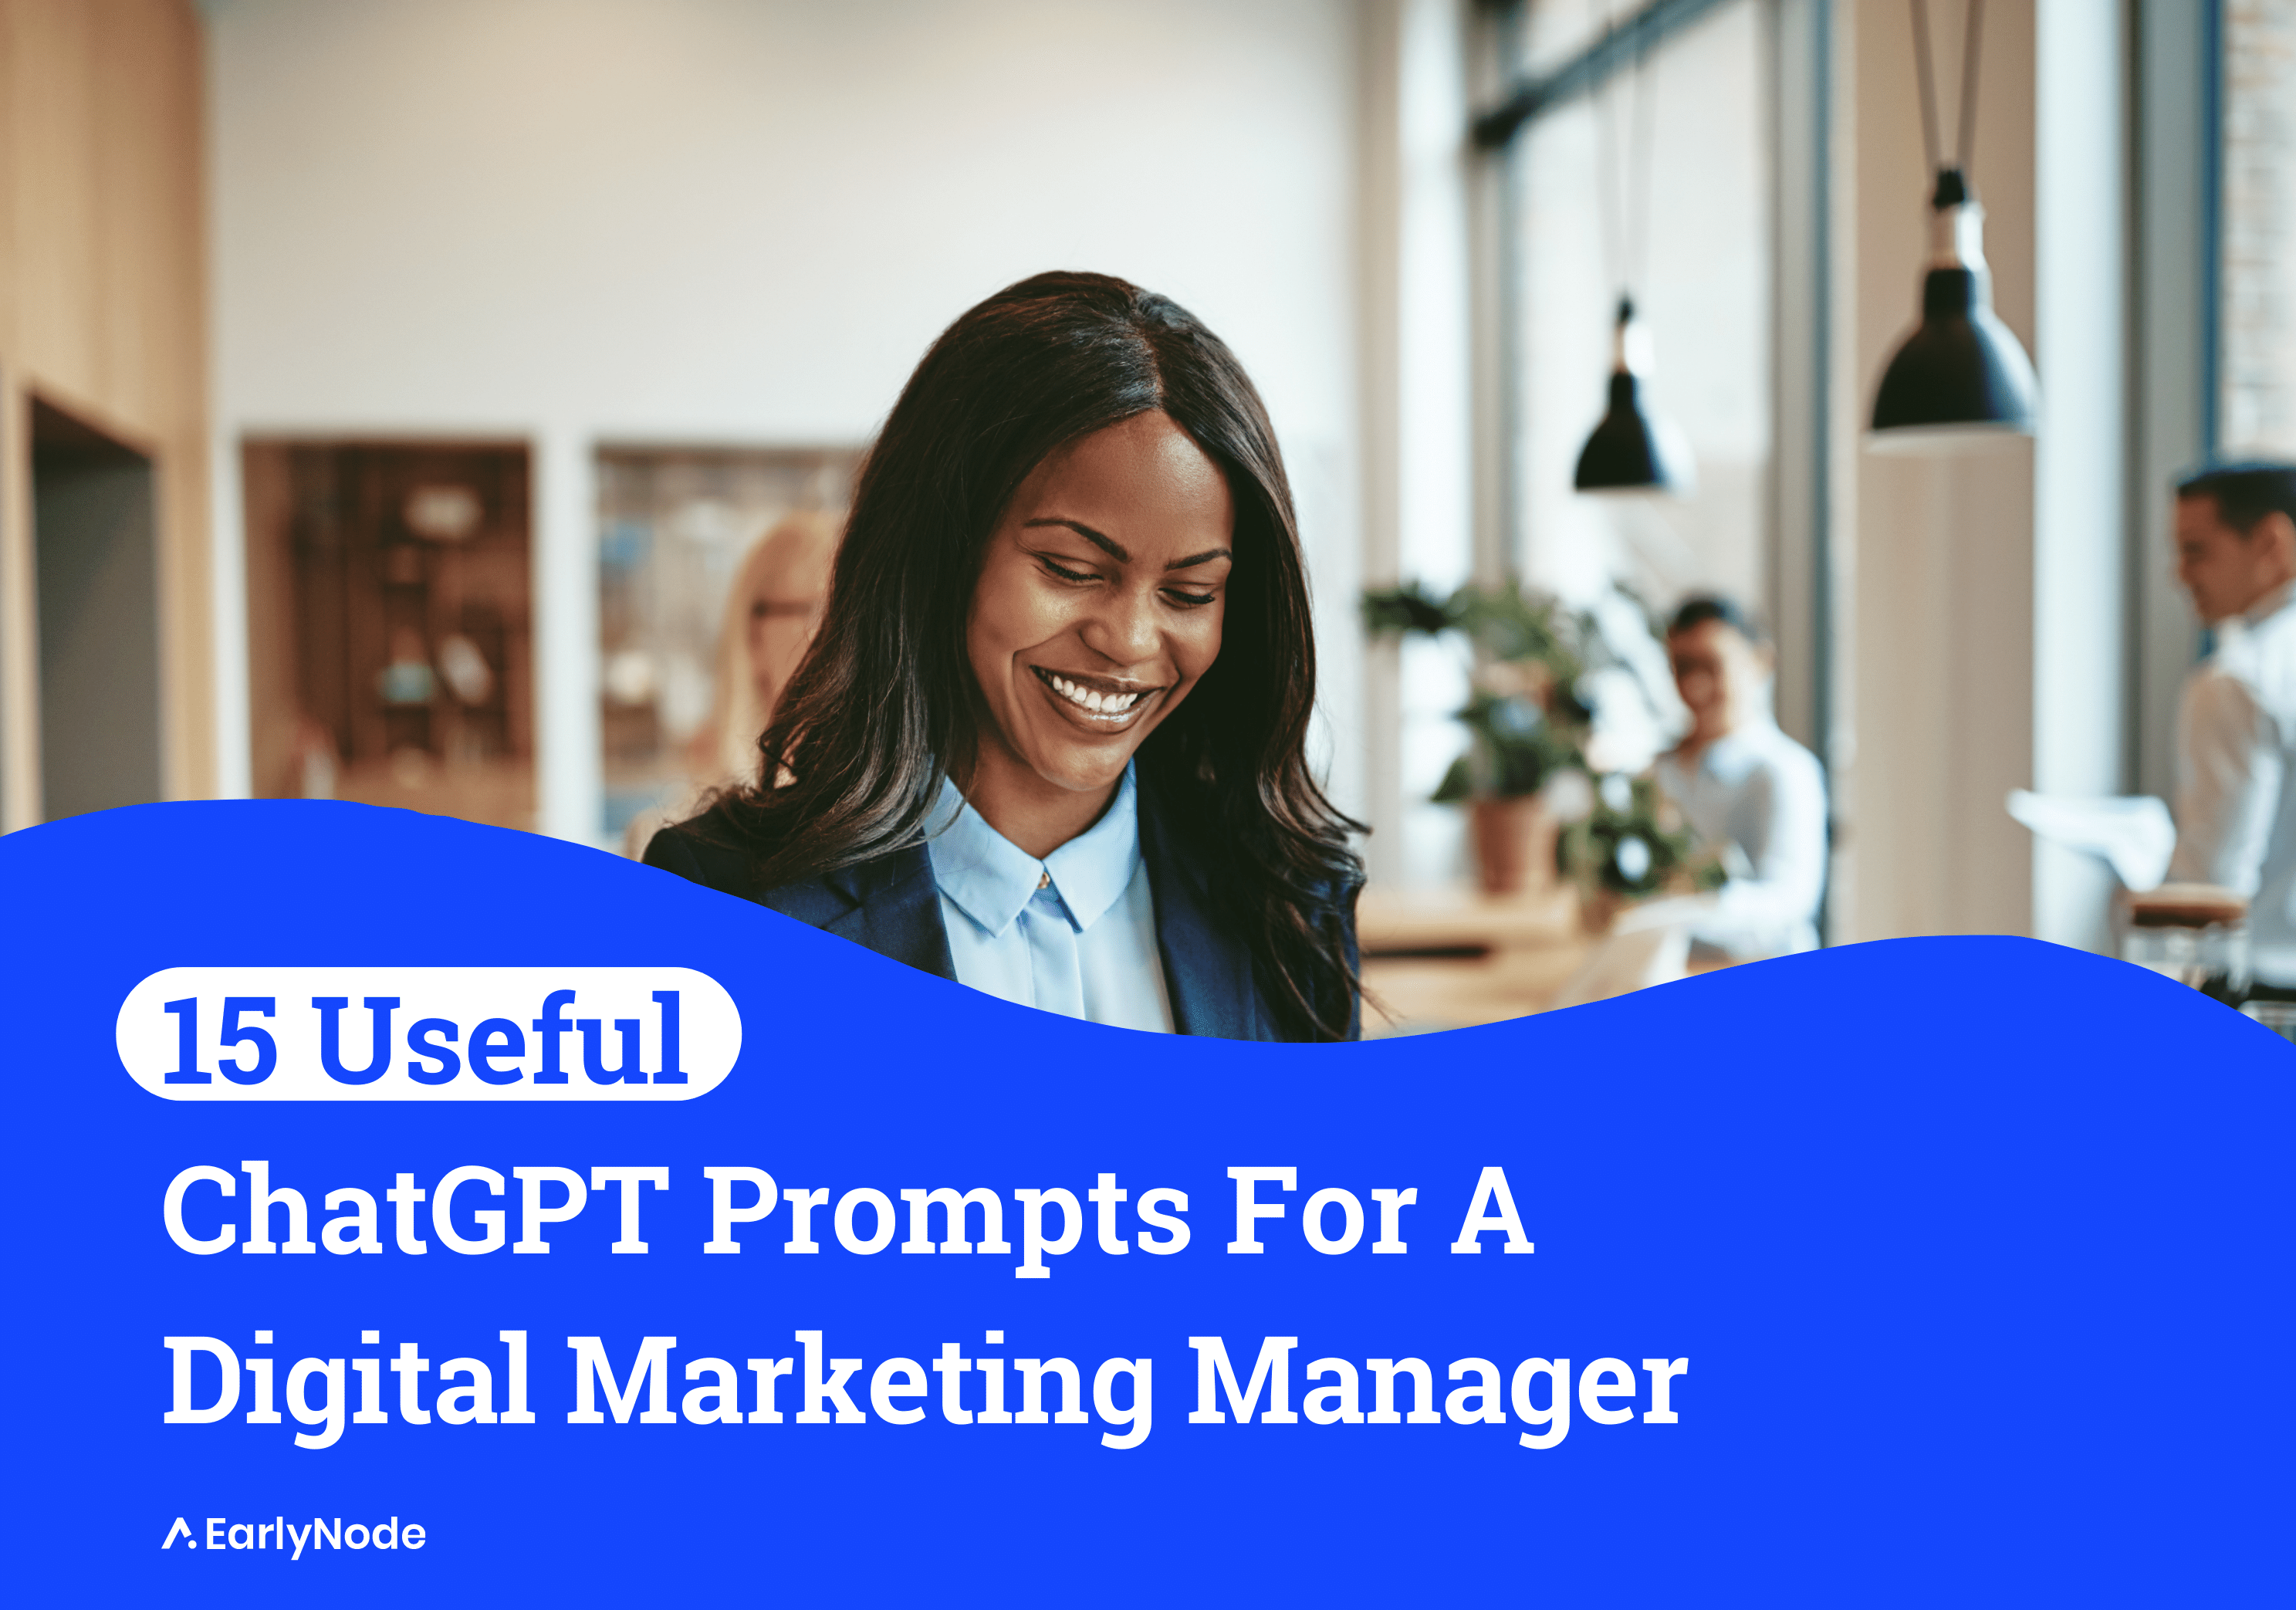 15 Useful ChatGPT Prompts For Digital Marketing Managers